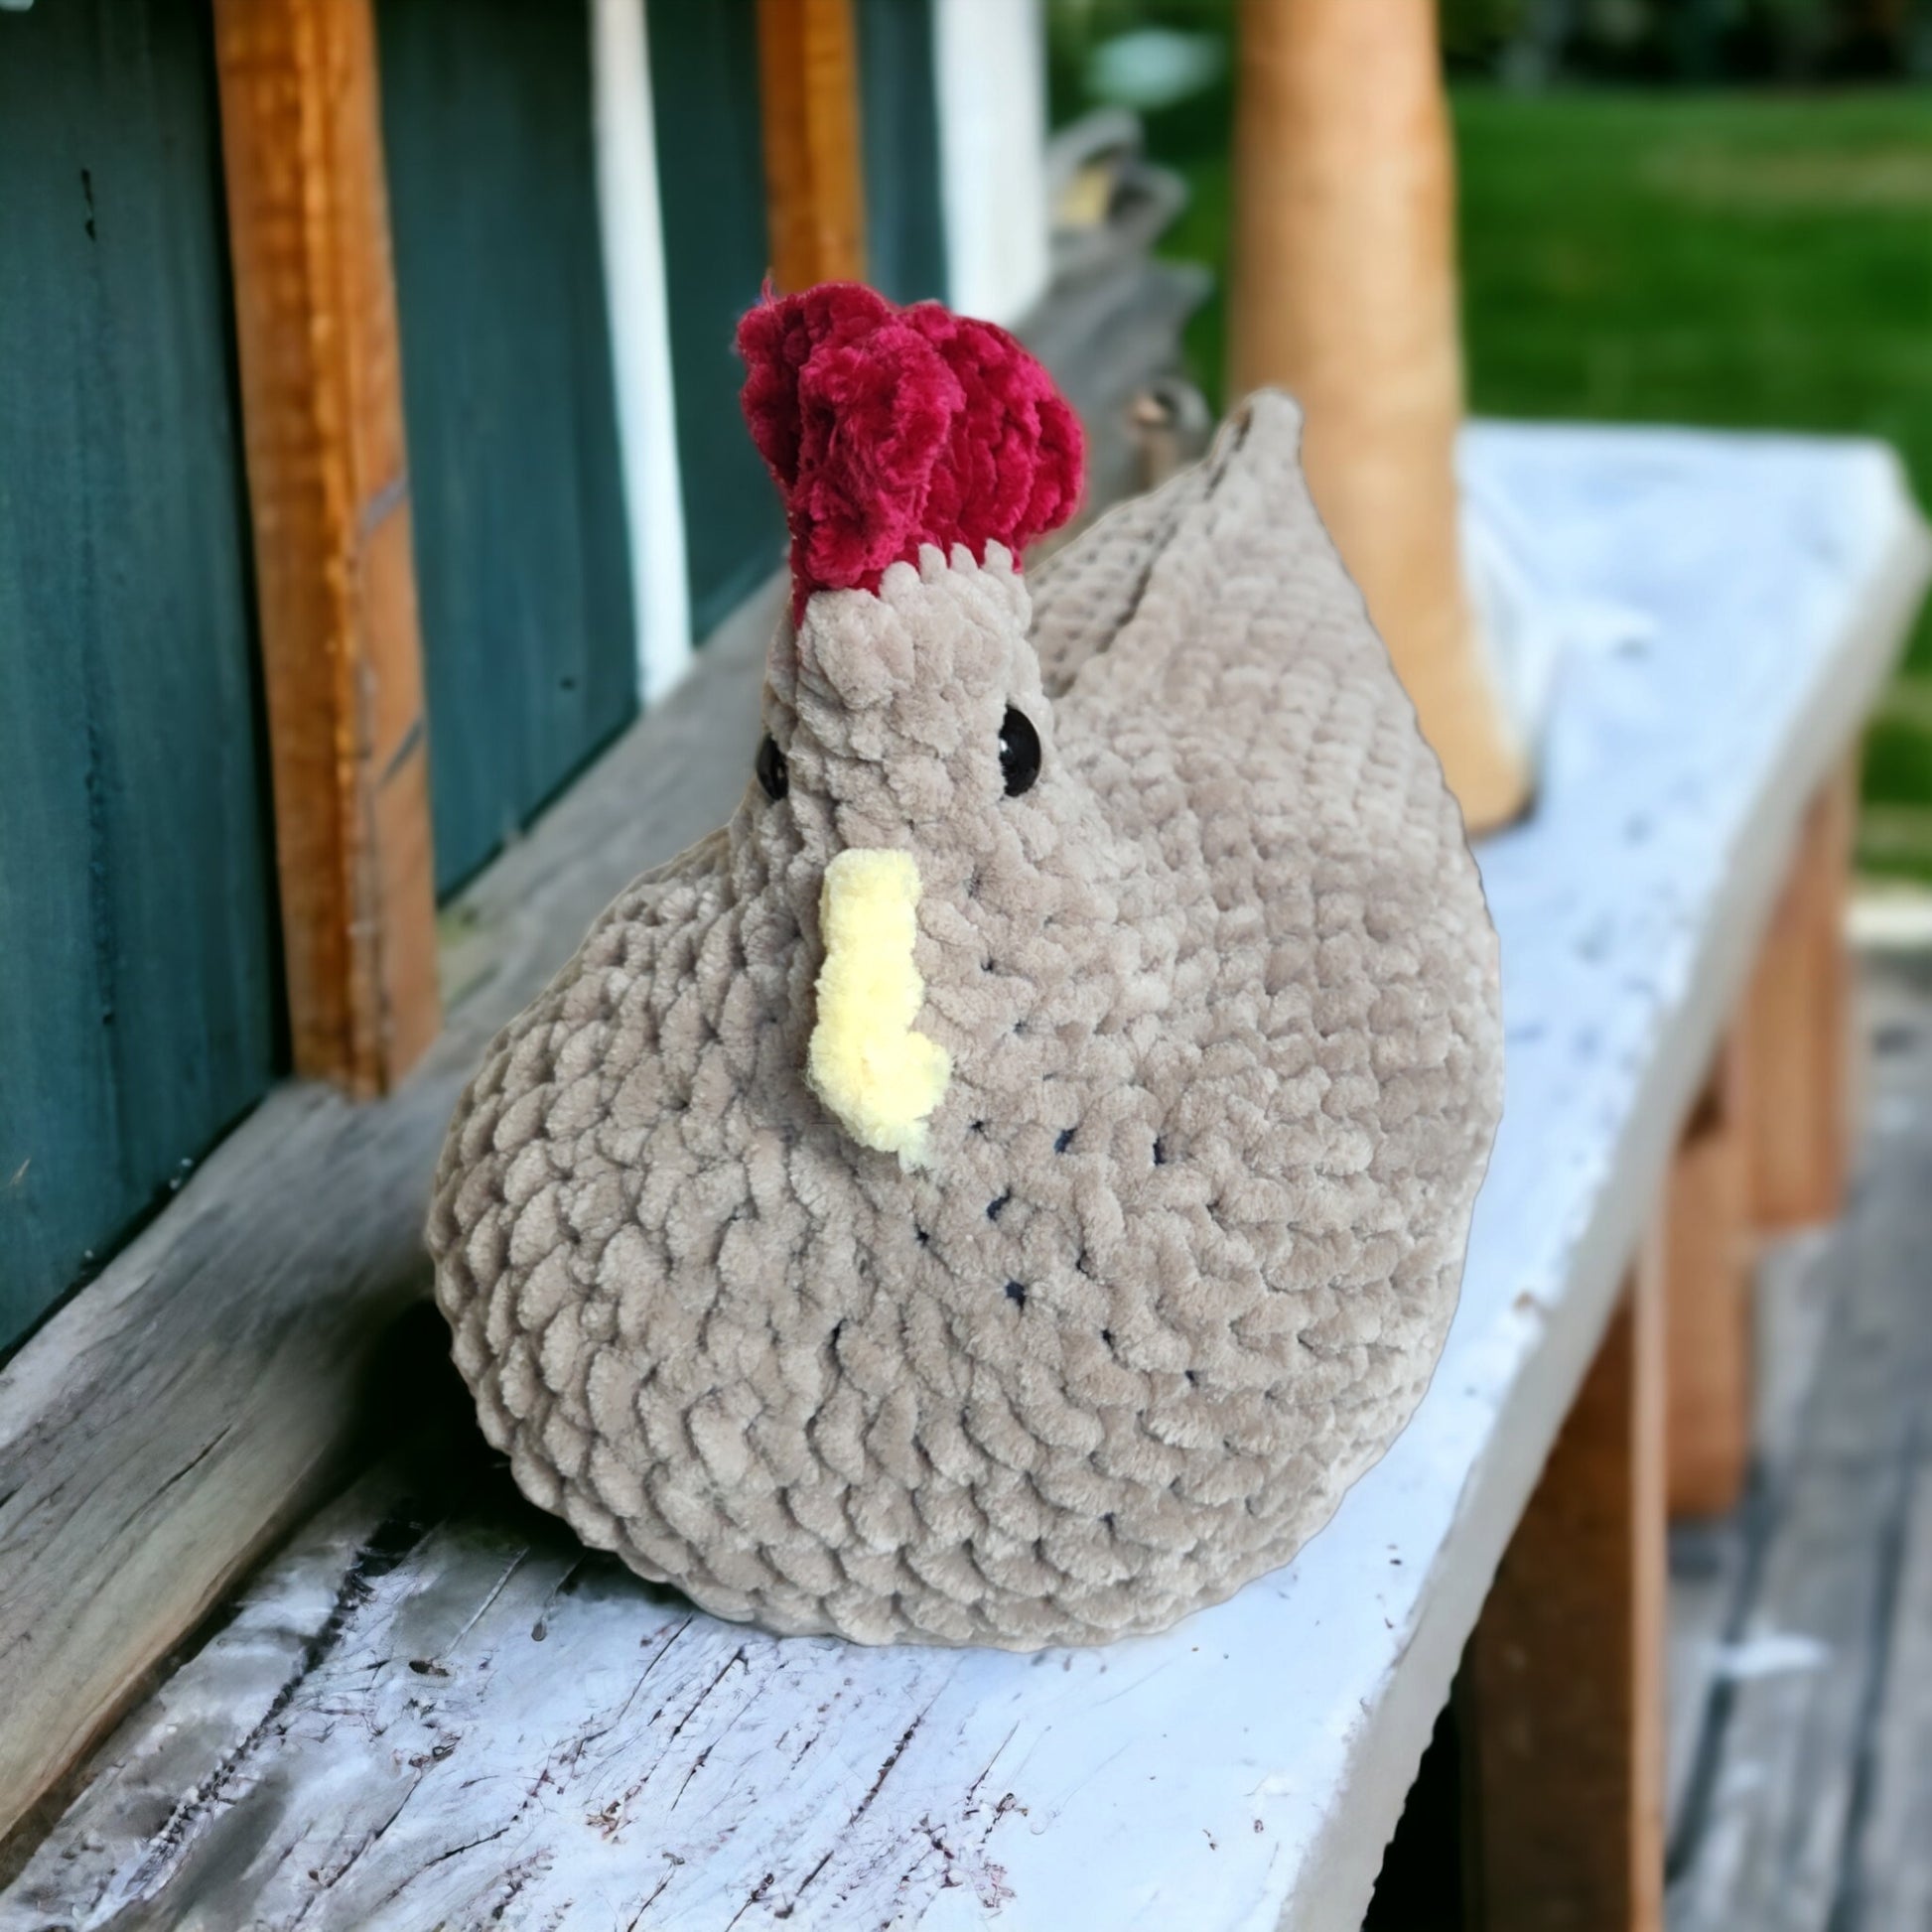 Crochet Support Chicken, emotional support, squeeze away worry